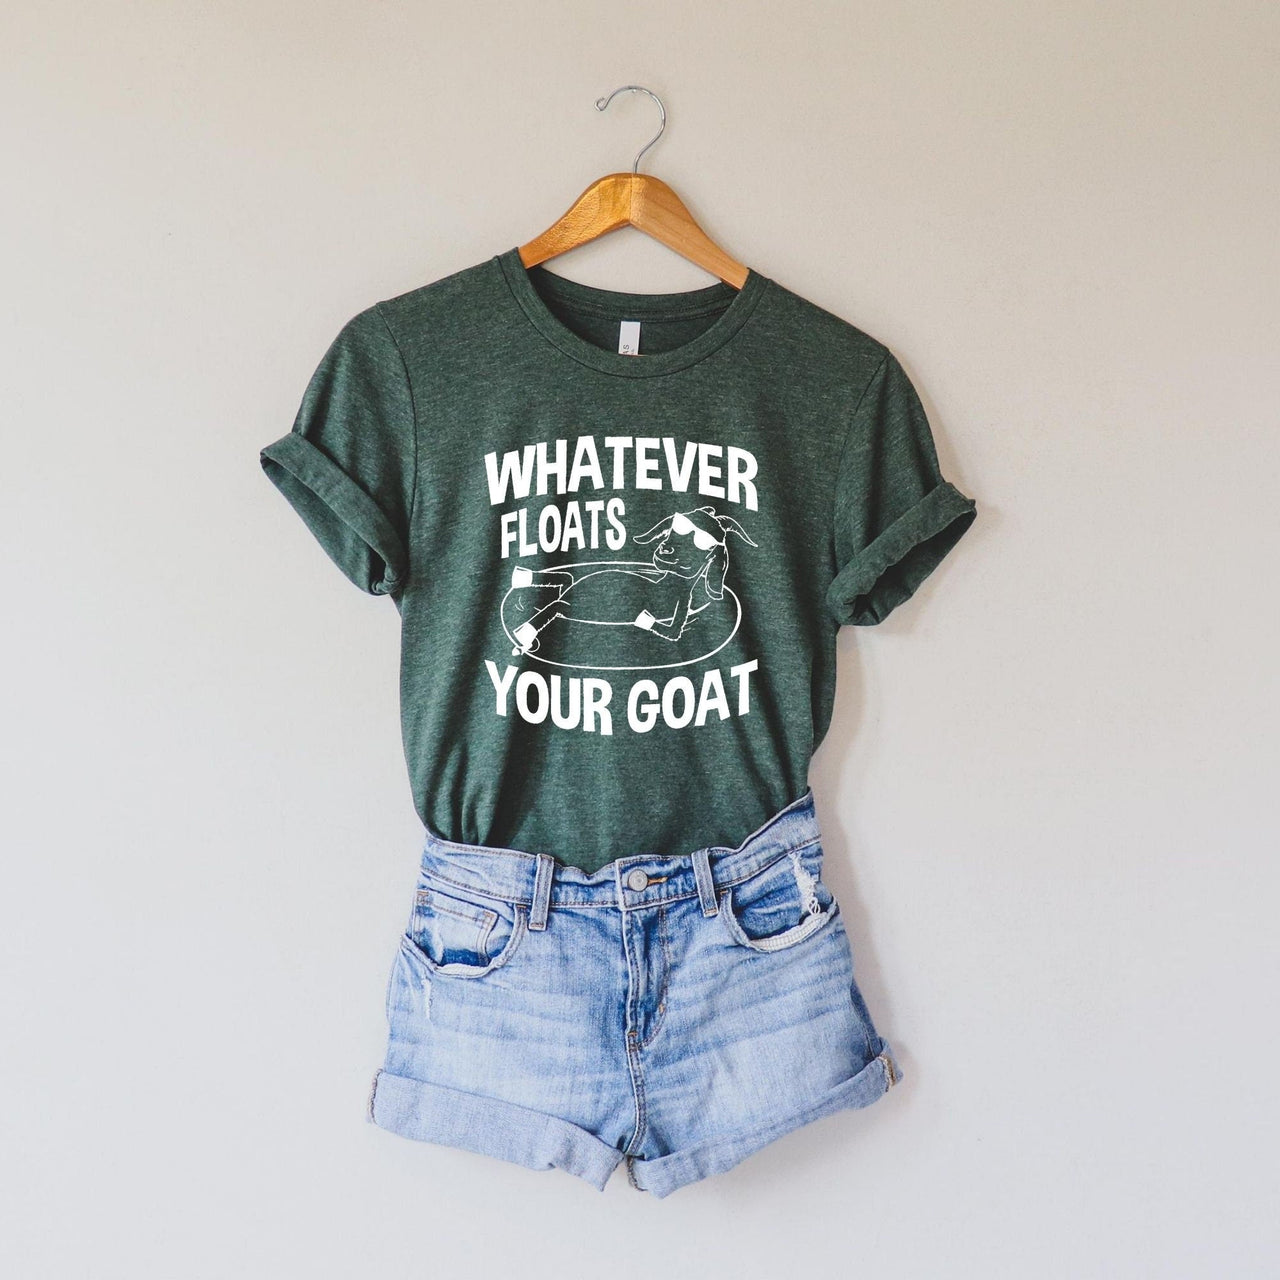 Hilarious Goat Shirt for Floating the River - Mercantile Mountain